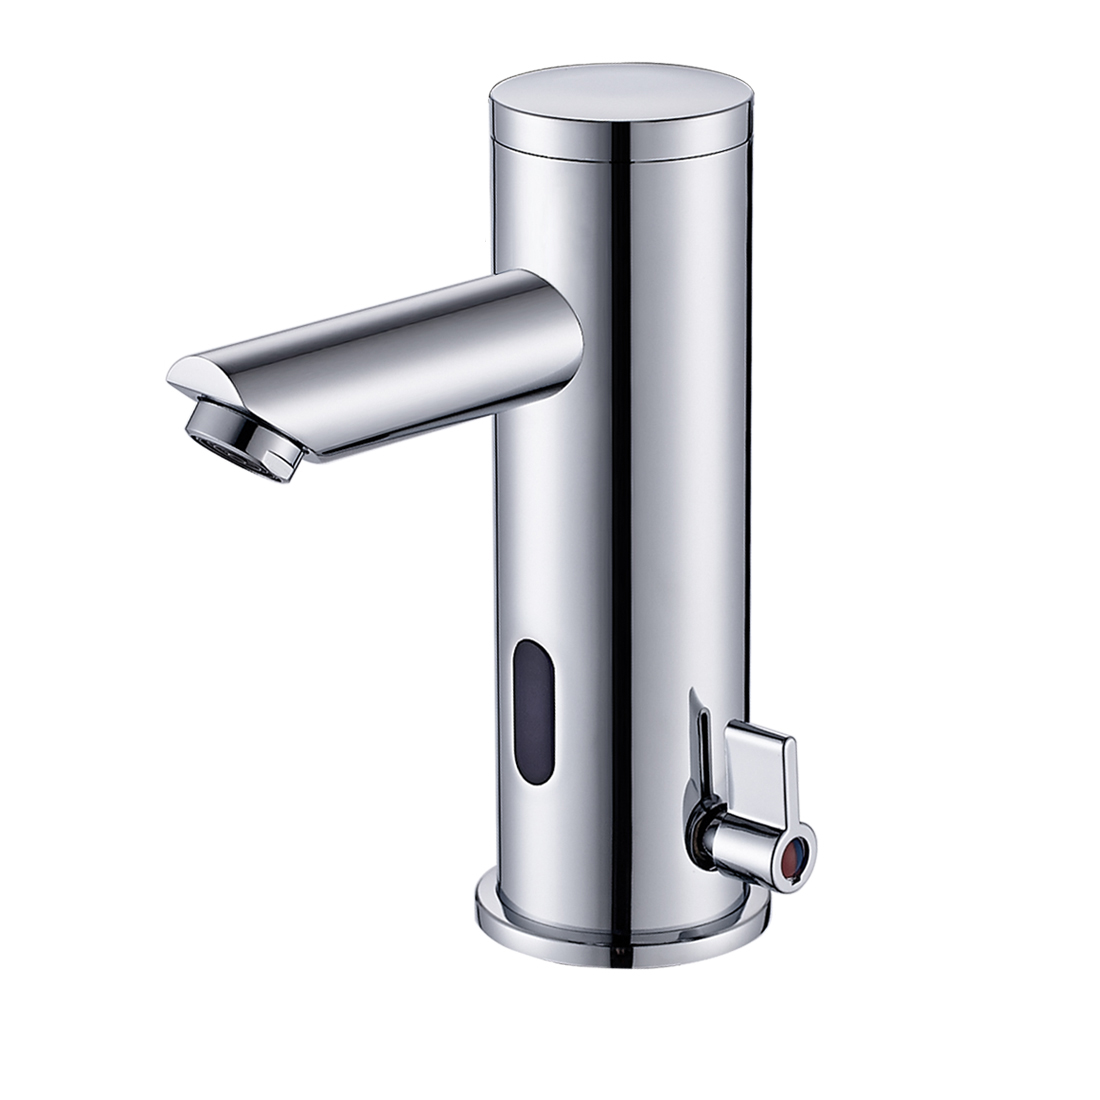 Single Lever Handle Temperature Control Touchless Mixer Bathroom Basin Faucets